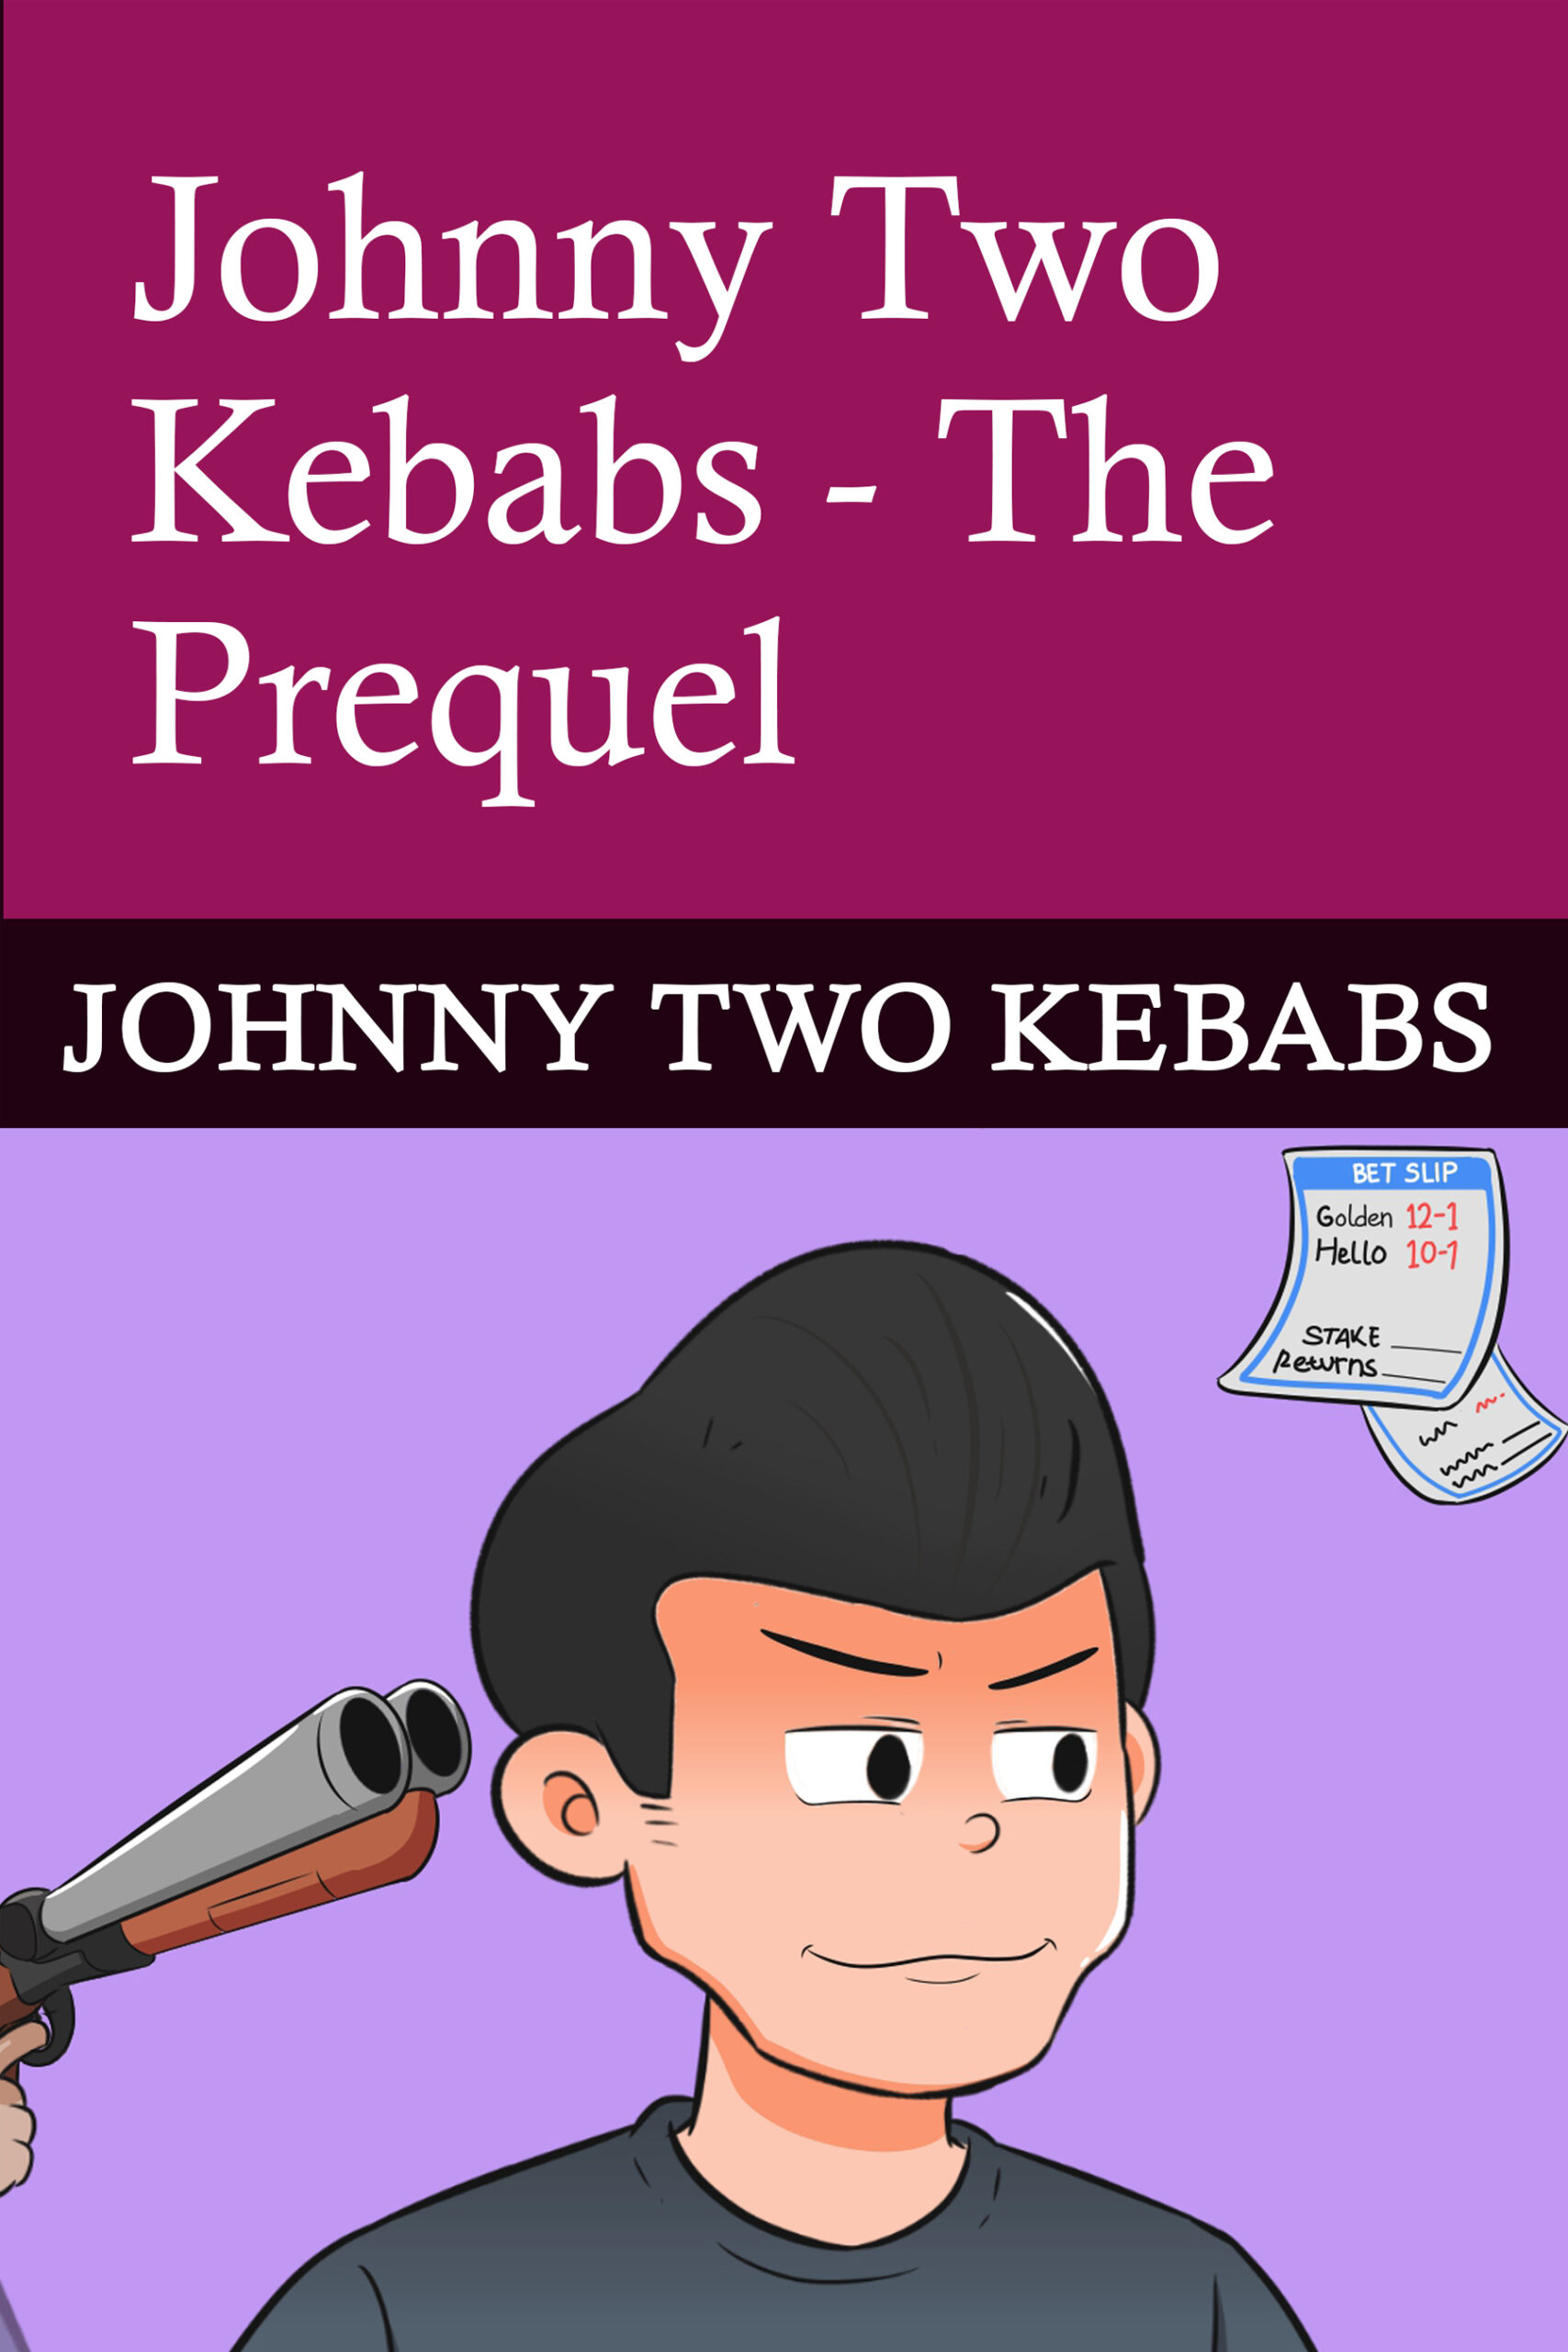 FREE: Johnny Two Kebabs – The Prequel by Johnny Two Kebabs